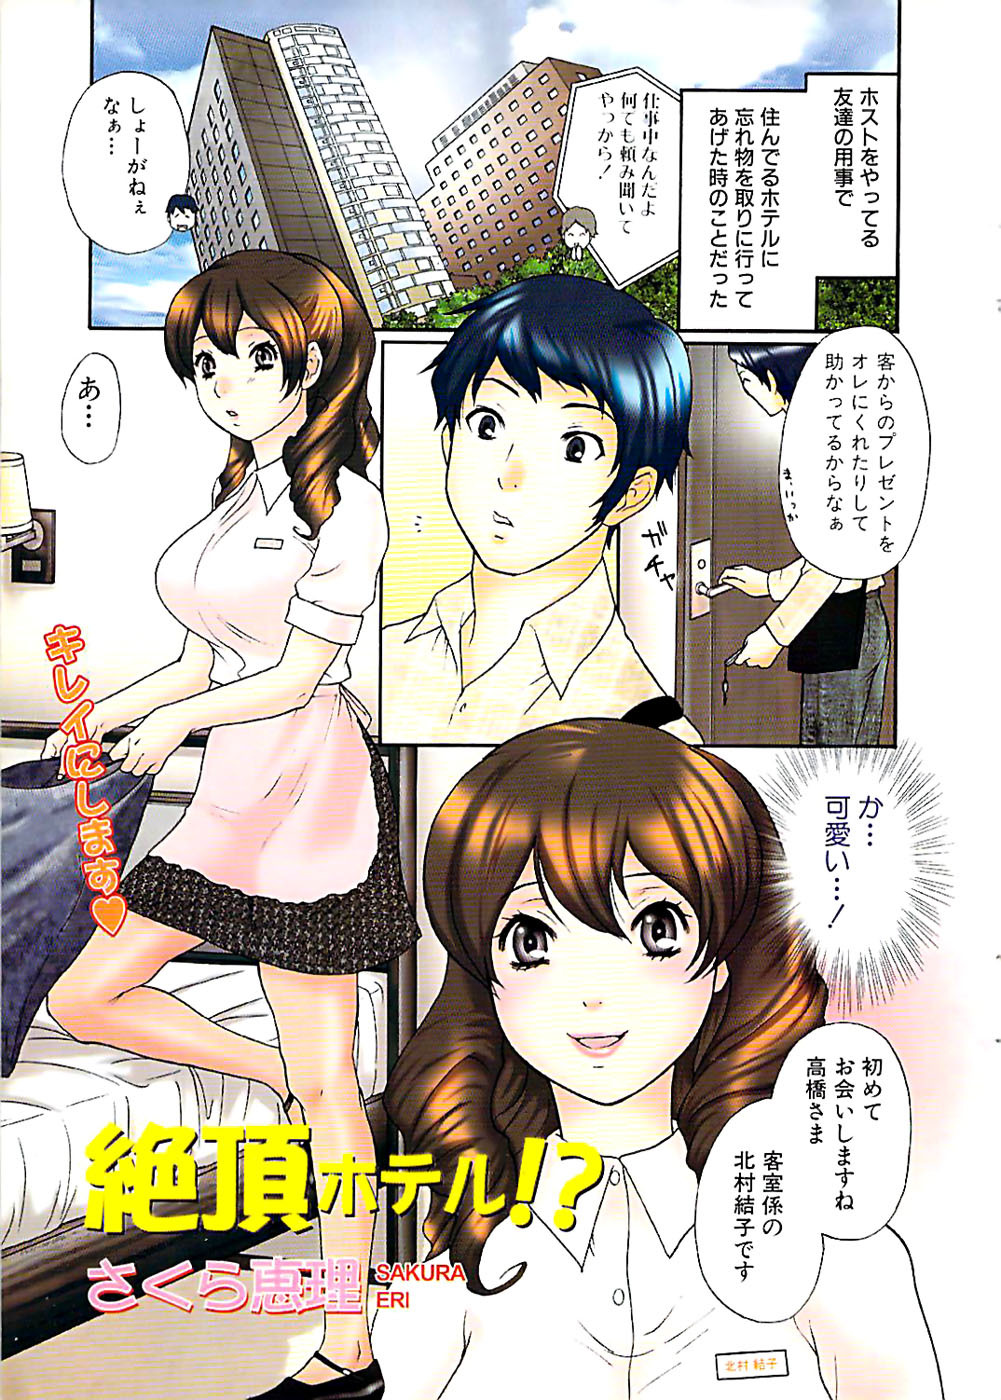 Doki! Special 2006-04 page 3 full